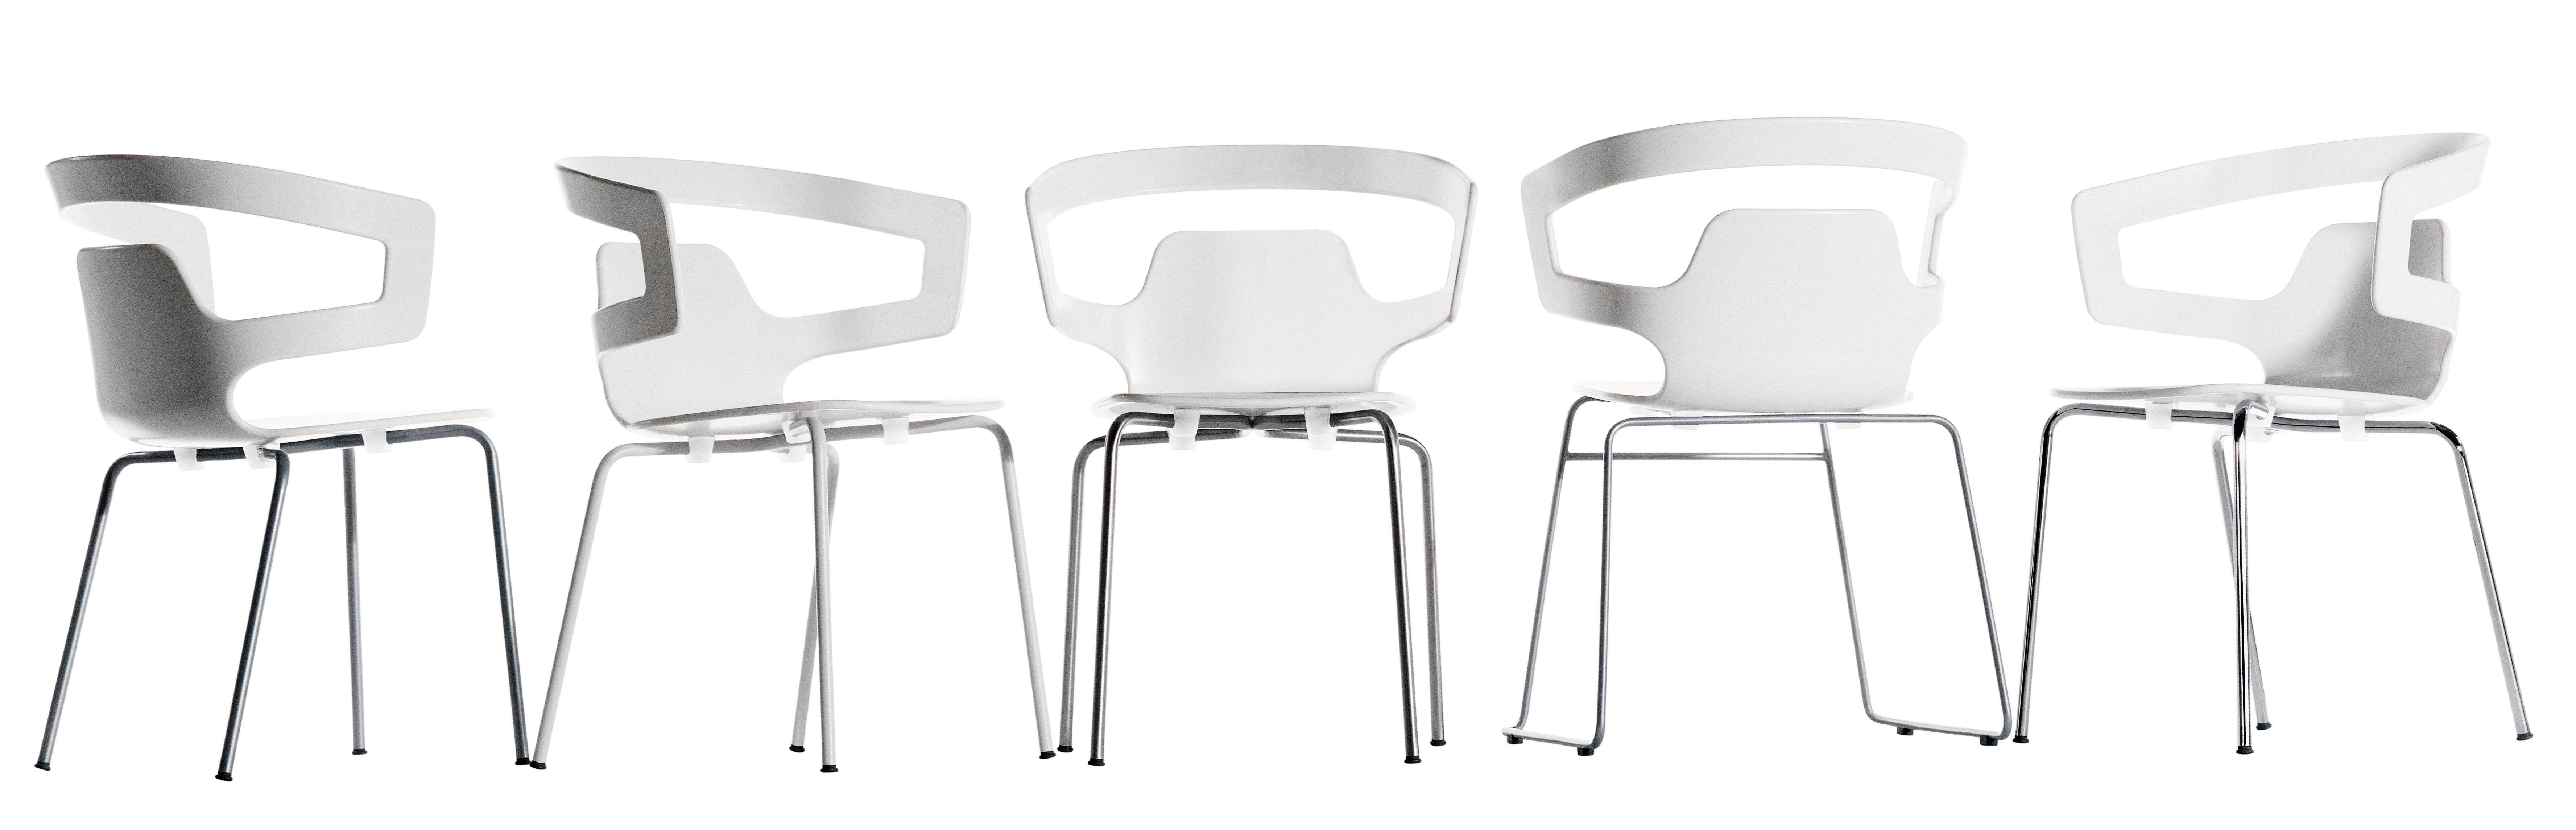 Alias 500 Segesta Chair in White Seat and Chromed Steel Frame by Alfredo Häberli For Sale 5